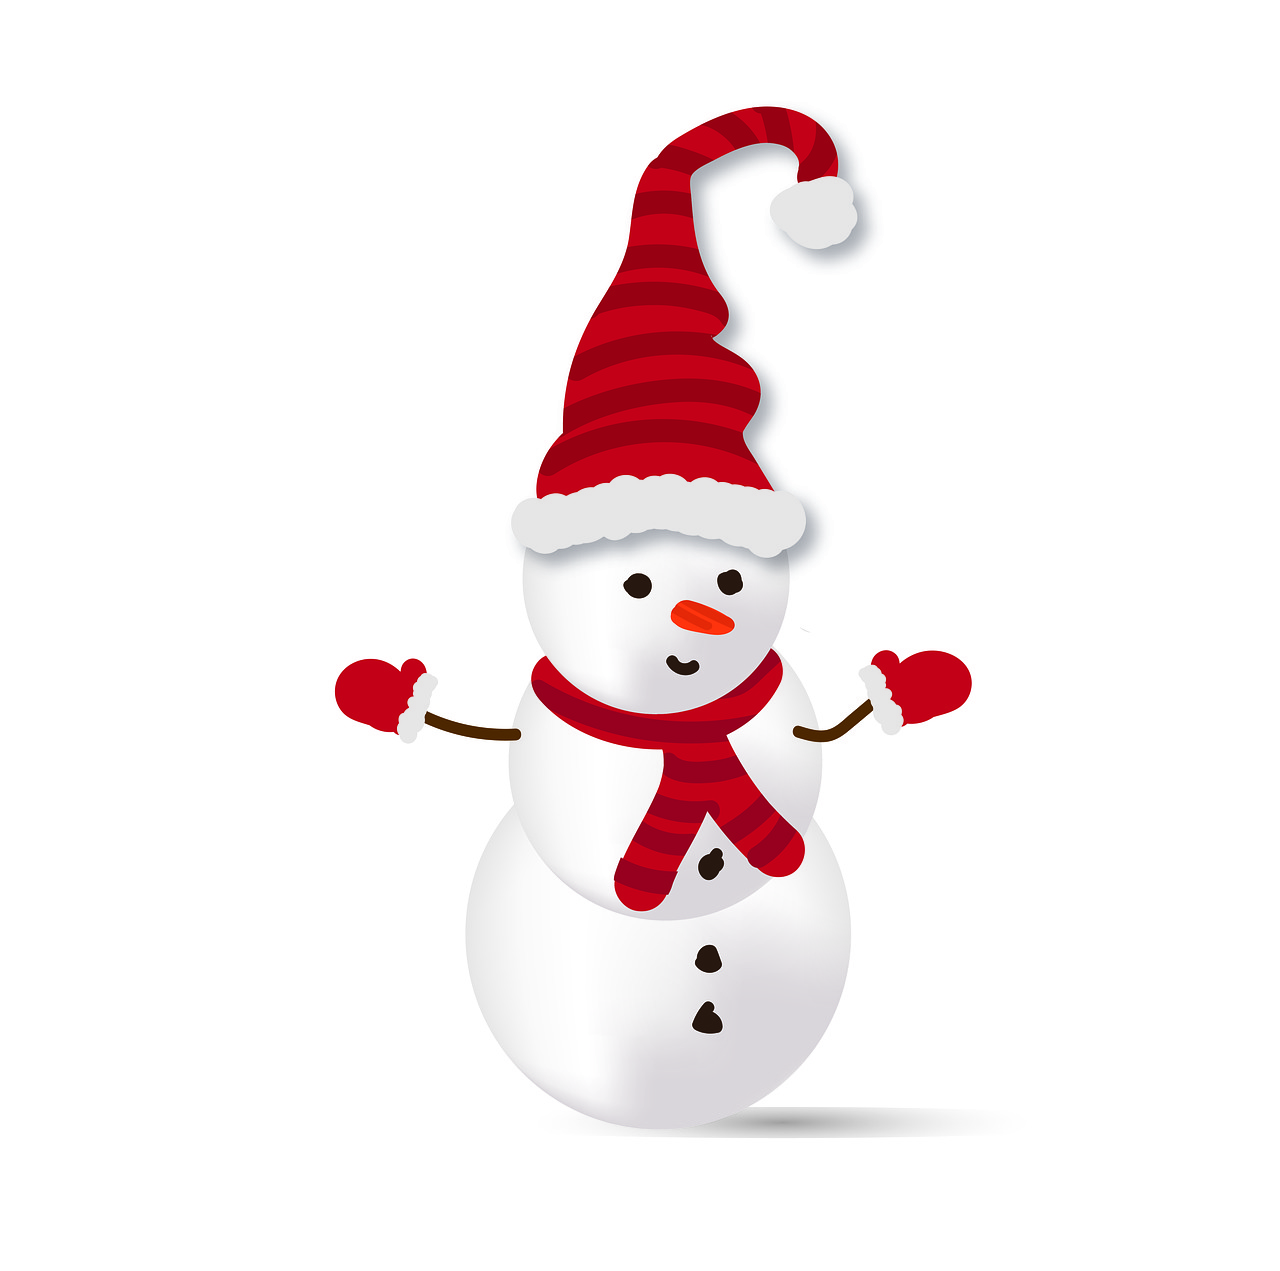 a snowman wearing a santa hat and mittens, shutterstock, figuration libre, isolated on white background, vector design, low resolution, paper